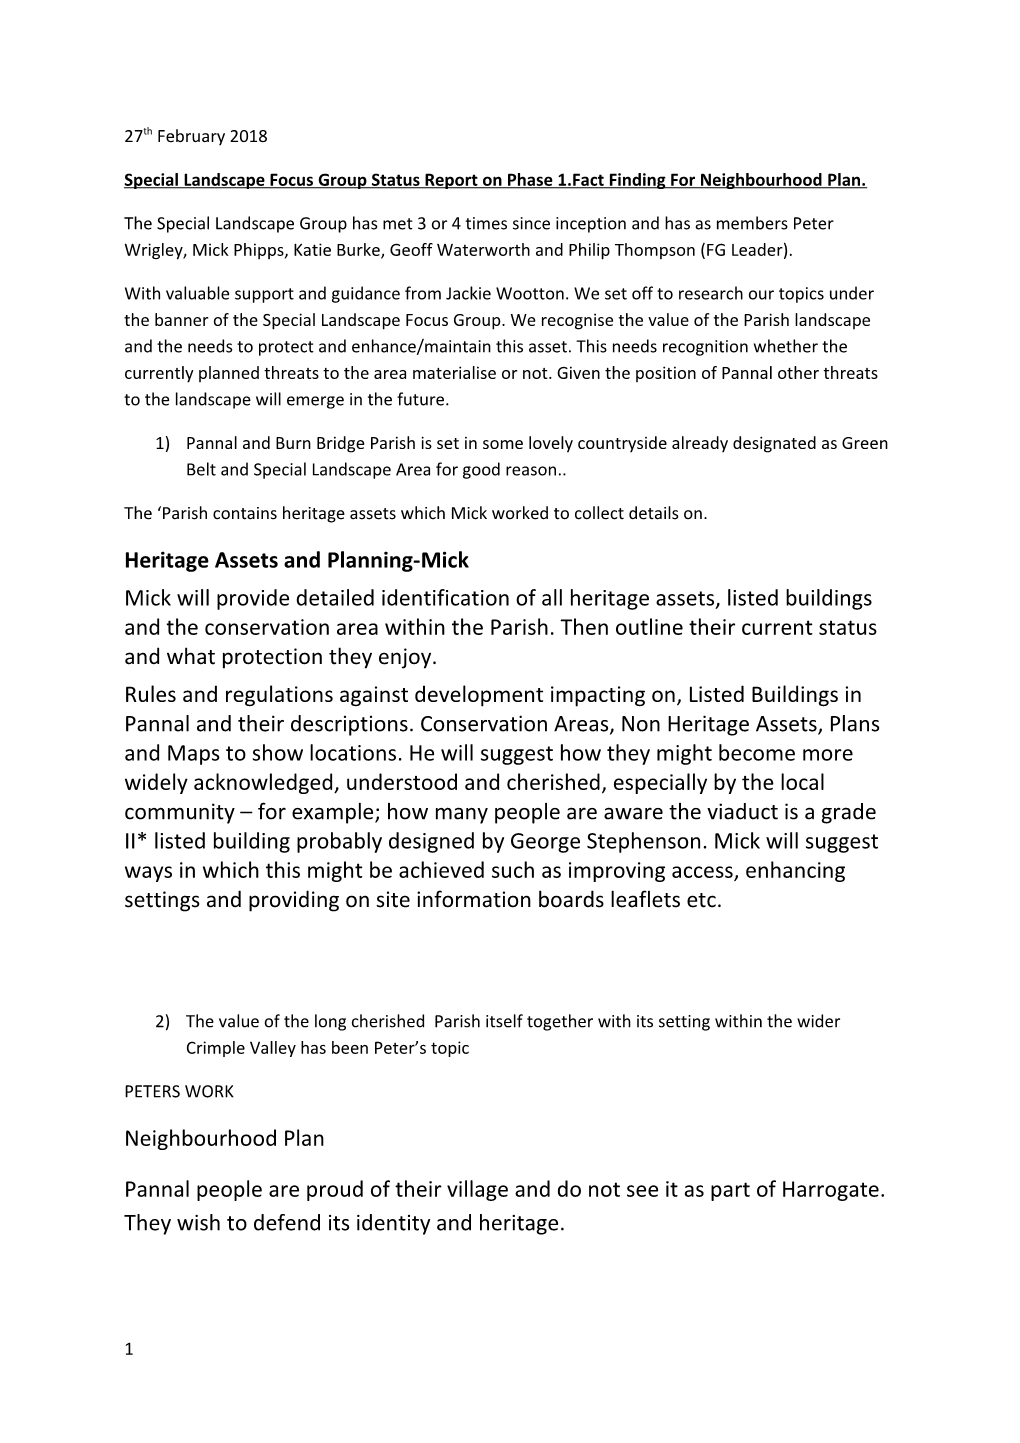 Special Landscape Focus Group Status Report on Phase 1.Fact Finding for Neighbourhood Plan